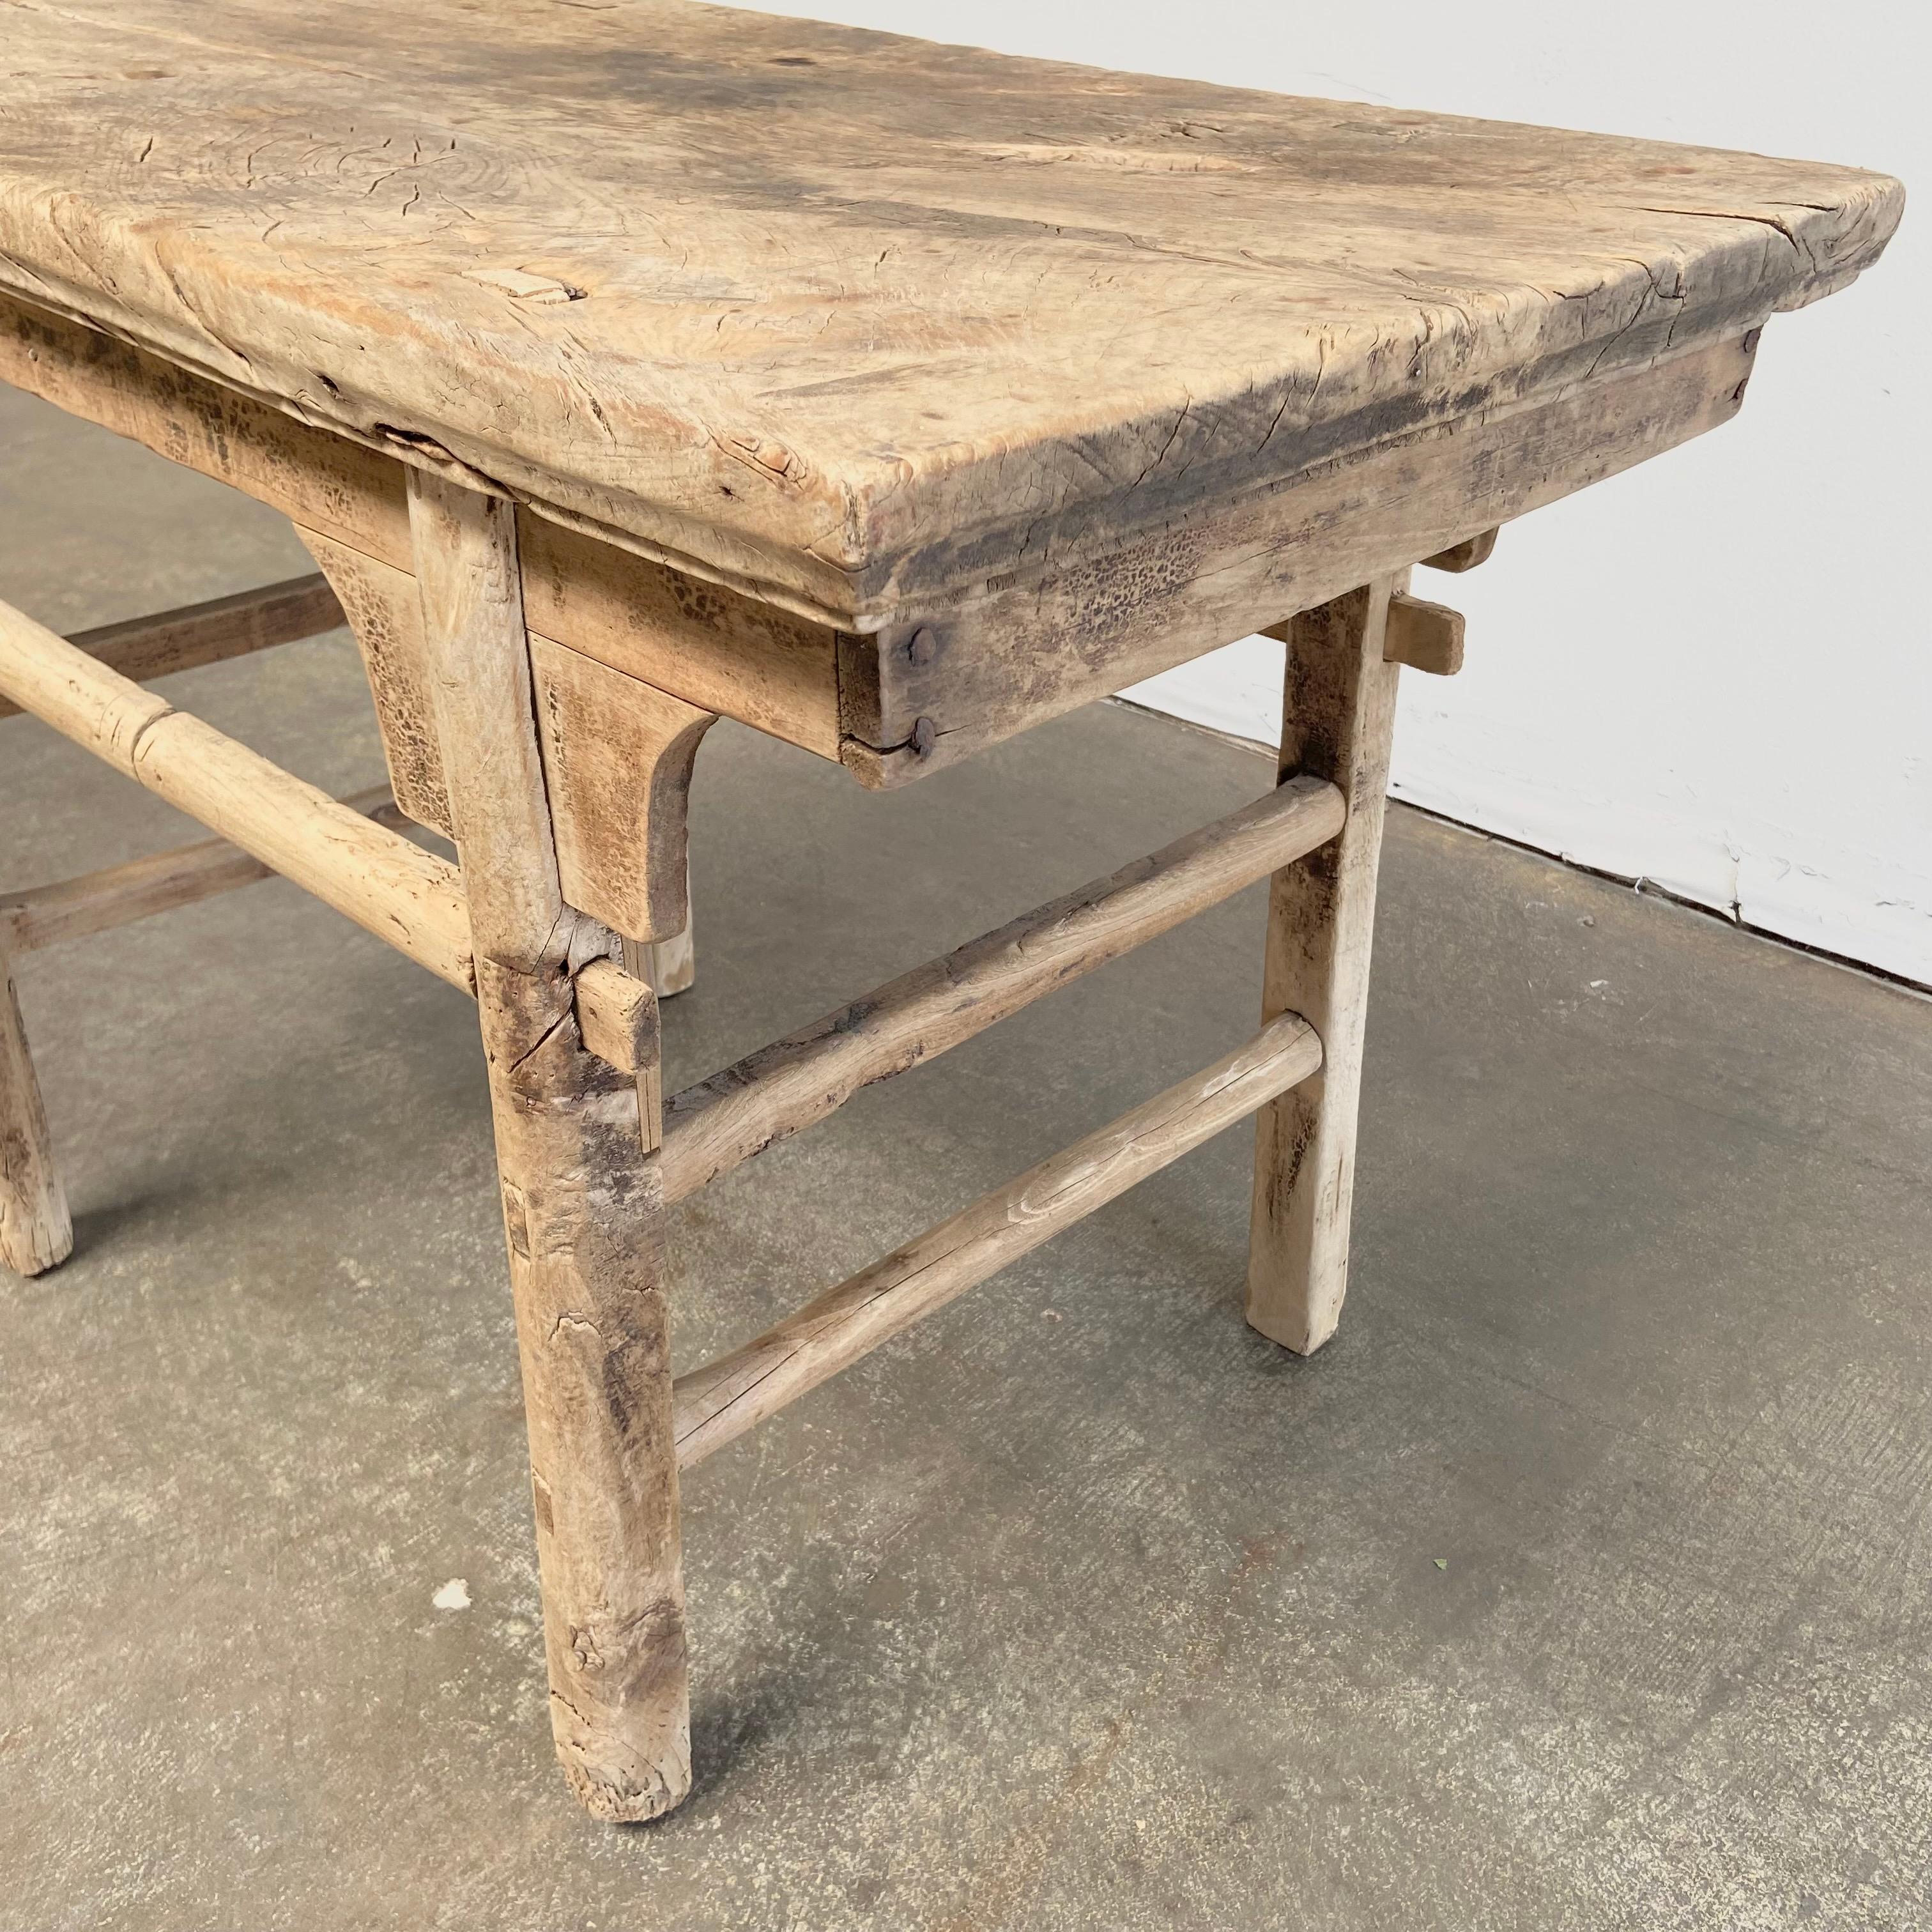 Vintage antique elm wood console table
Made from vintage reclaimed elm wood. Beautiful antique patina, with weathering and age, these are solid and sturdy ready for daily use, use as a entry table, sofa table or console in a dining room. Great in a